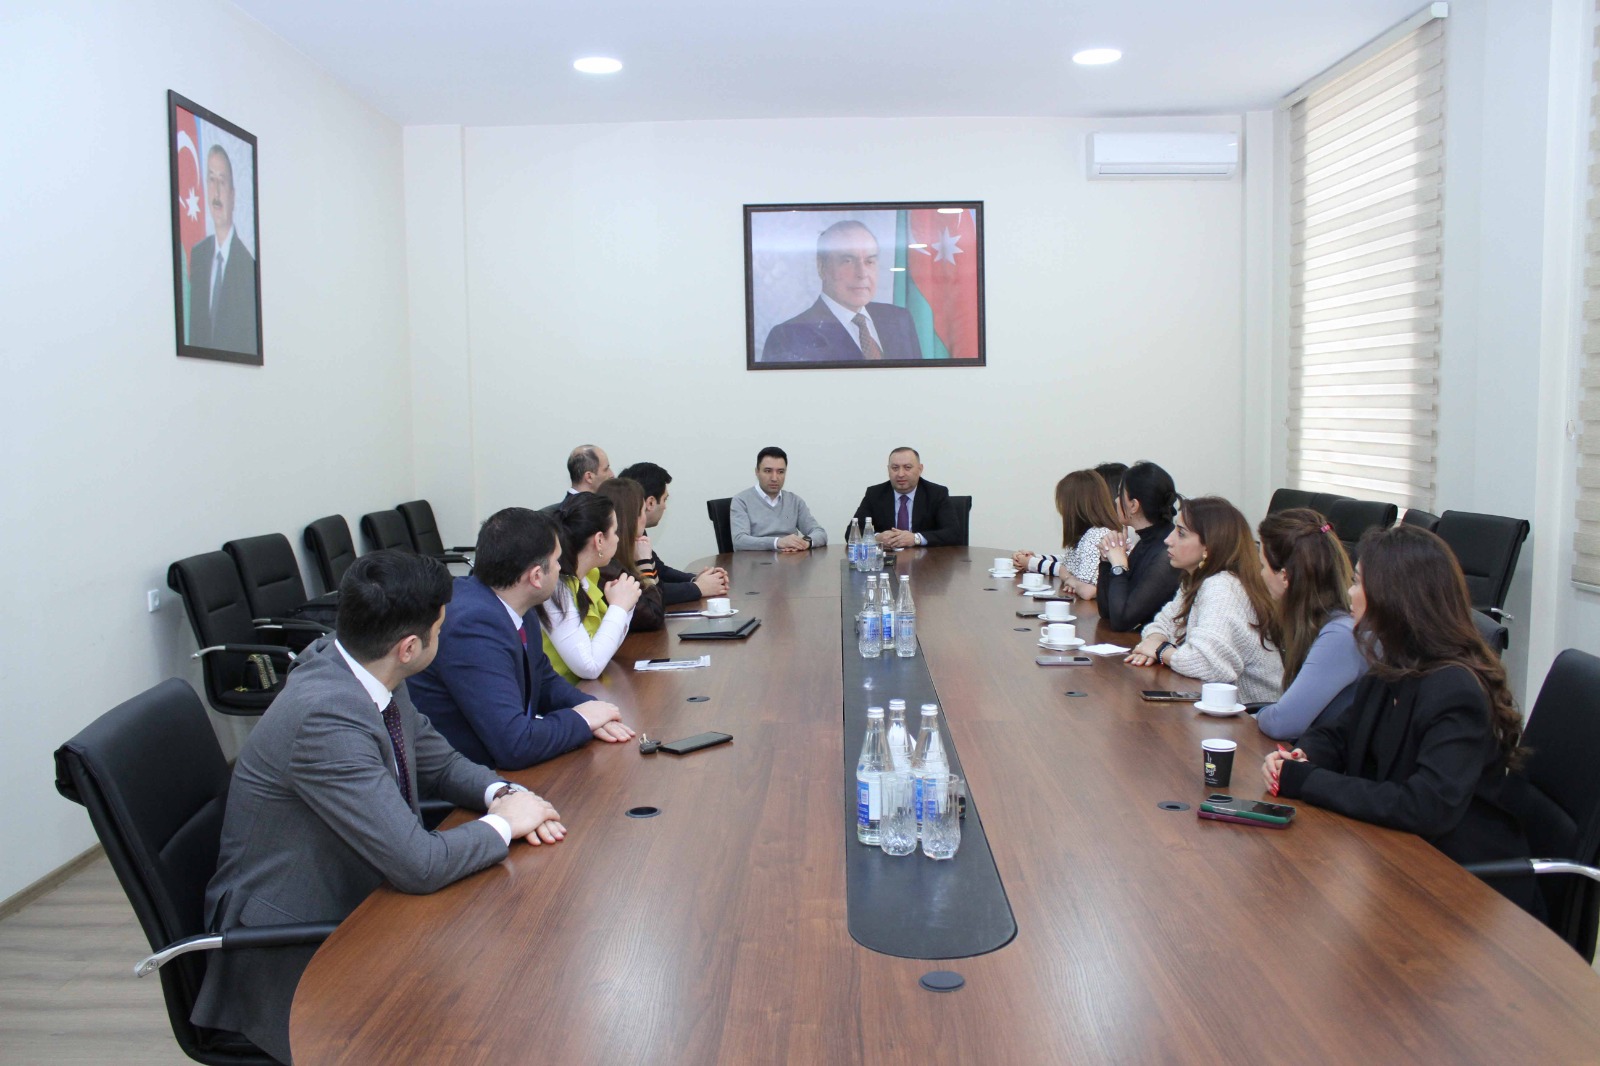 The next meeting within the framework of the "Azerbaijan Rectors' Conference" project